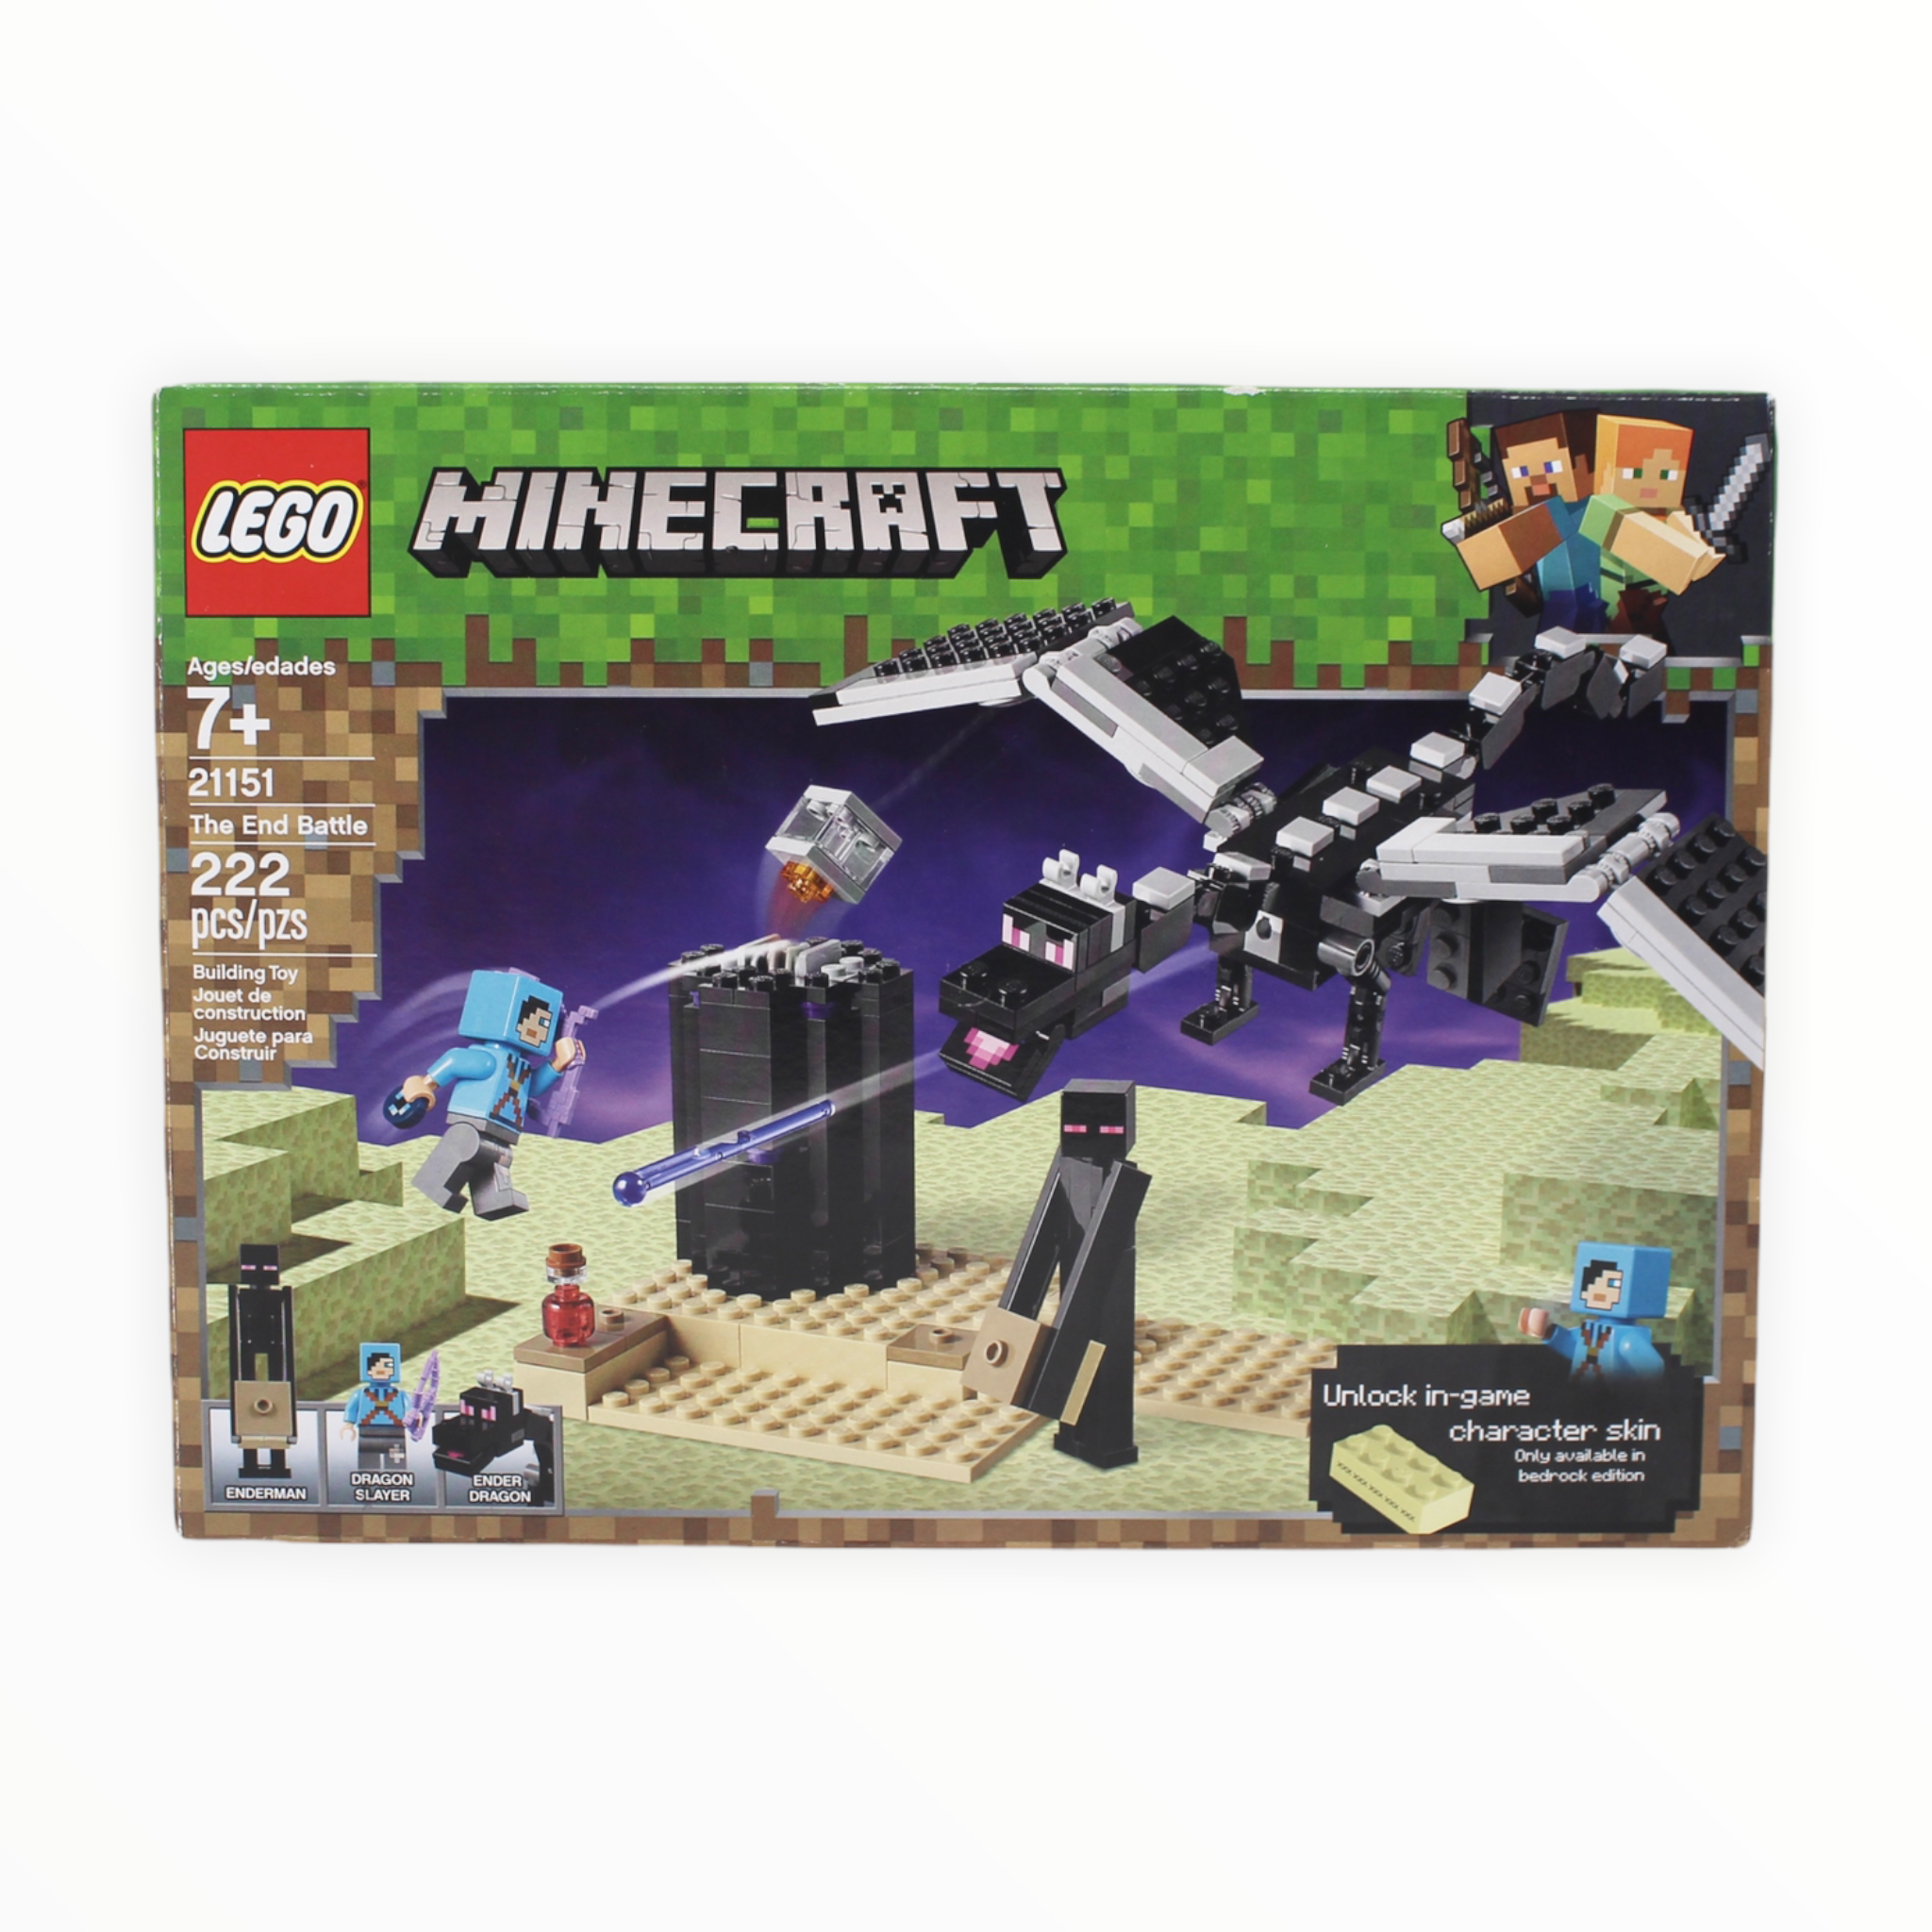 Certified Used Set 21151 Minecraft The End Battle